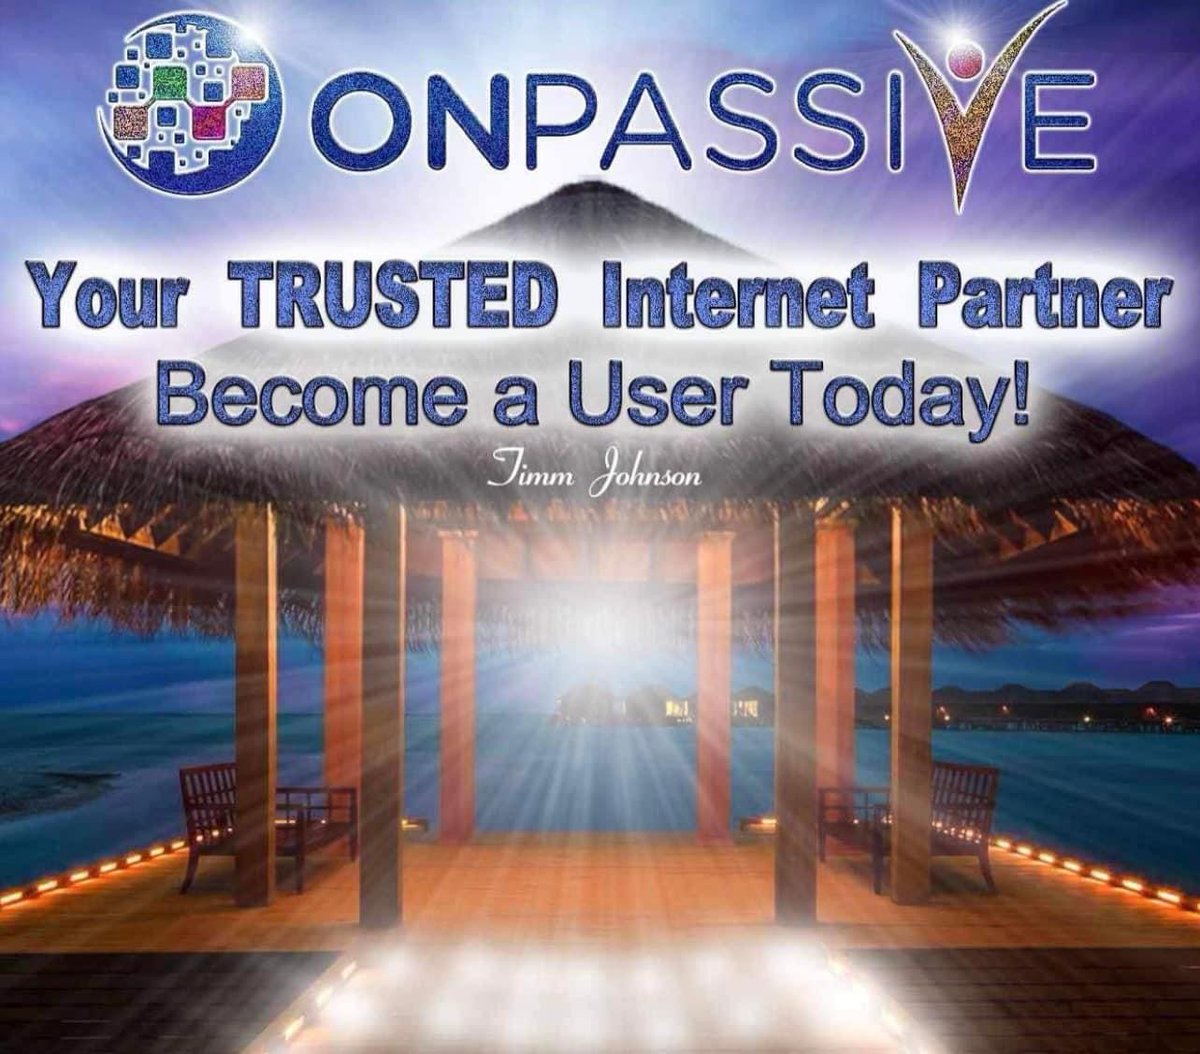 Everyone Succeeds with ONPASSIVE!

Join us here: o-trim.co/LeFz3h

#ONPASSIVE #TheFutureOfInternt #ResidualIncome #allautomated #AIproducts #AItools #onlinebusiness #ArtificialIntelligence